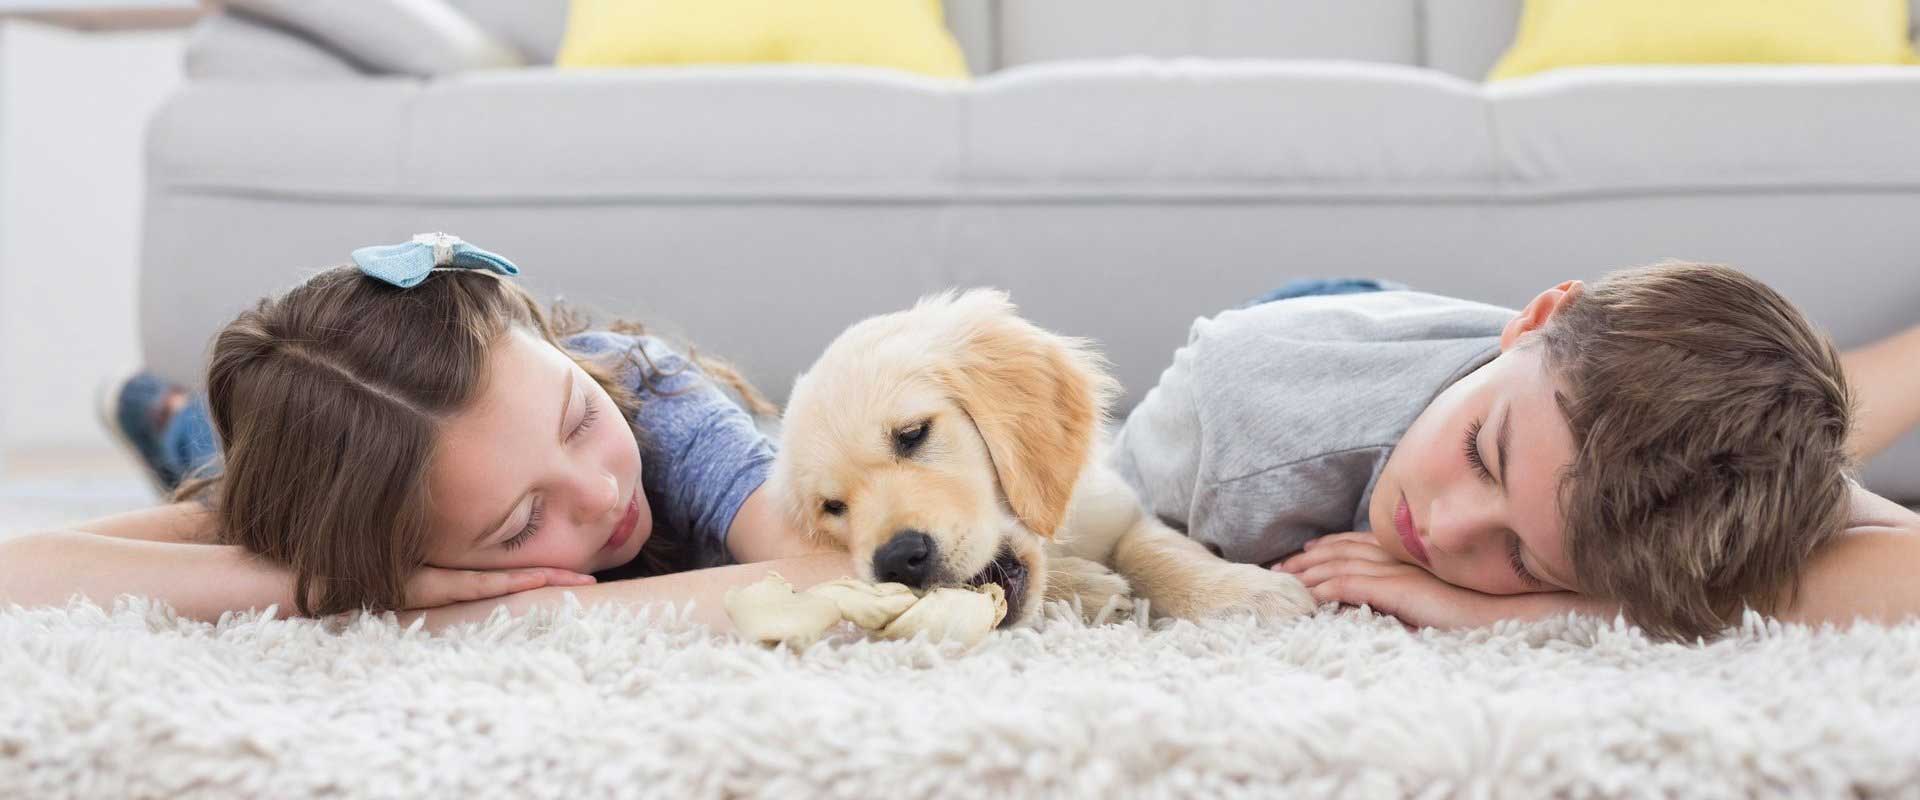 Kids and Puppy